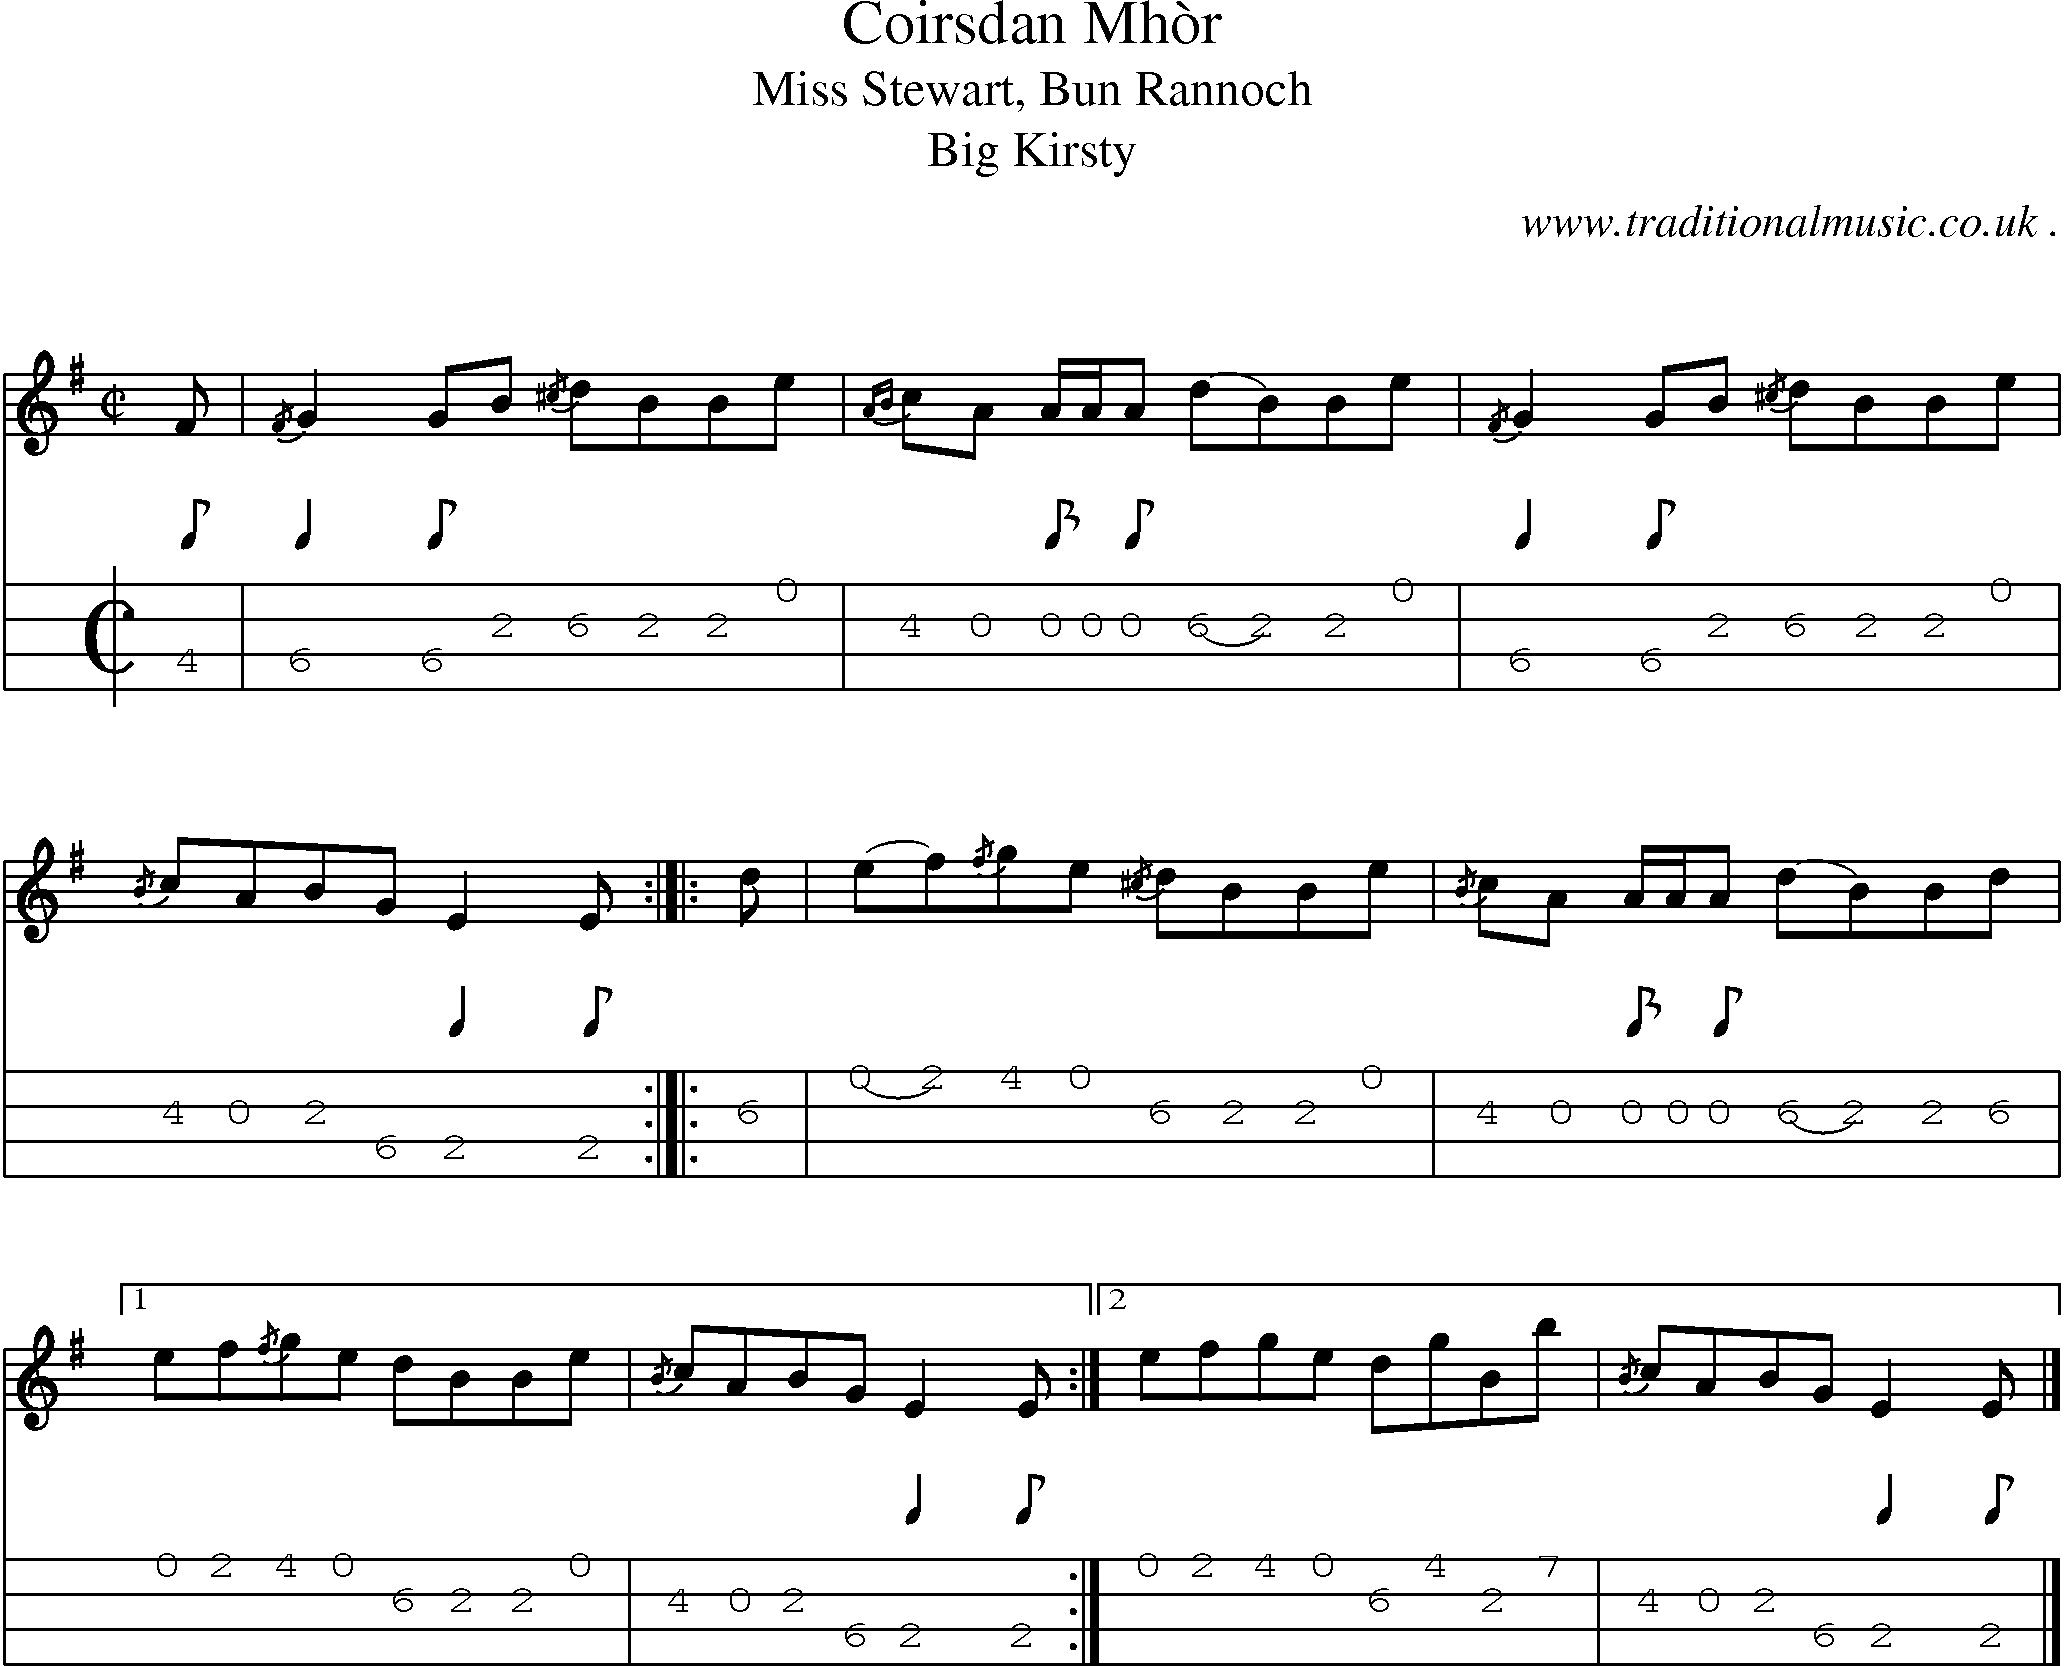 Sheet-music  score, Chords and Mandolin Tabs for Coirsdan Mhor